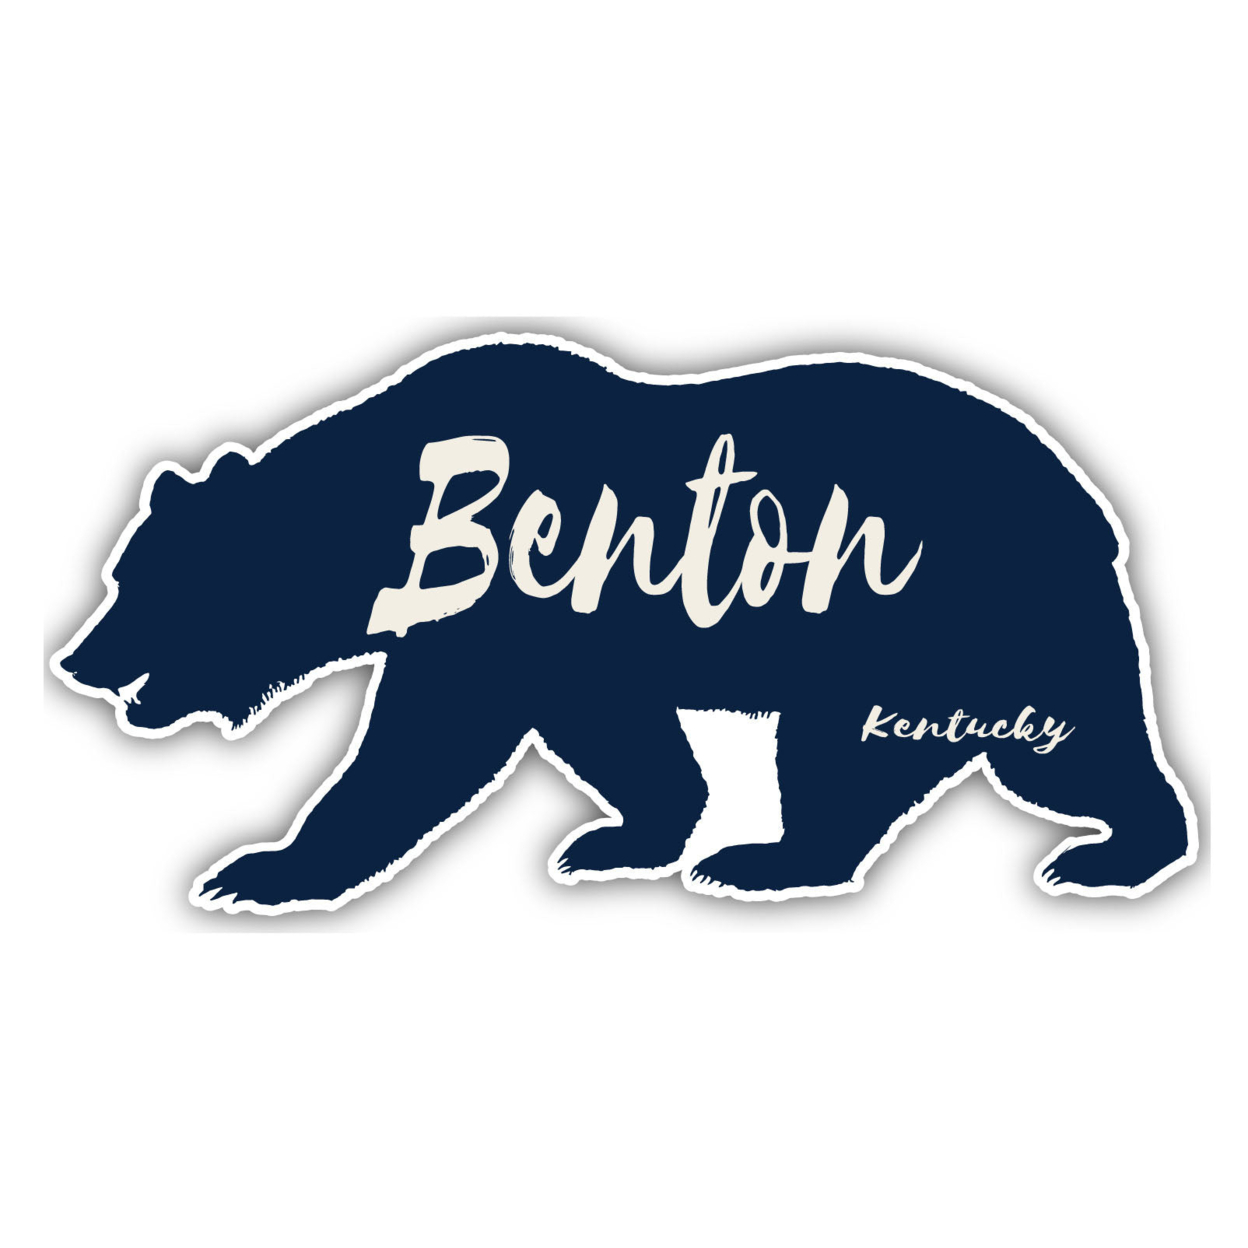 Benton Kentucky Souvenir Decorative Stickers (Choose Theme And Size) - 4-Pack, 6-Inch, Great Outdoors